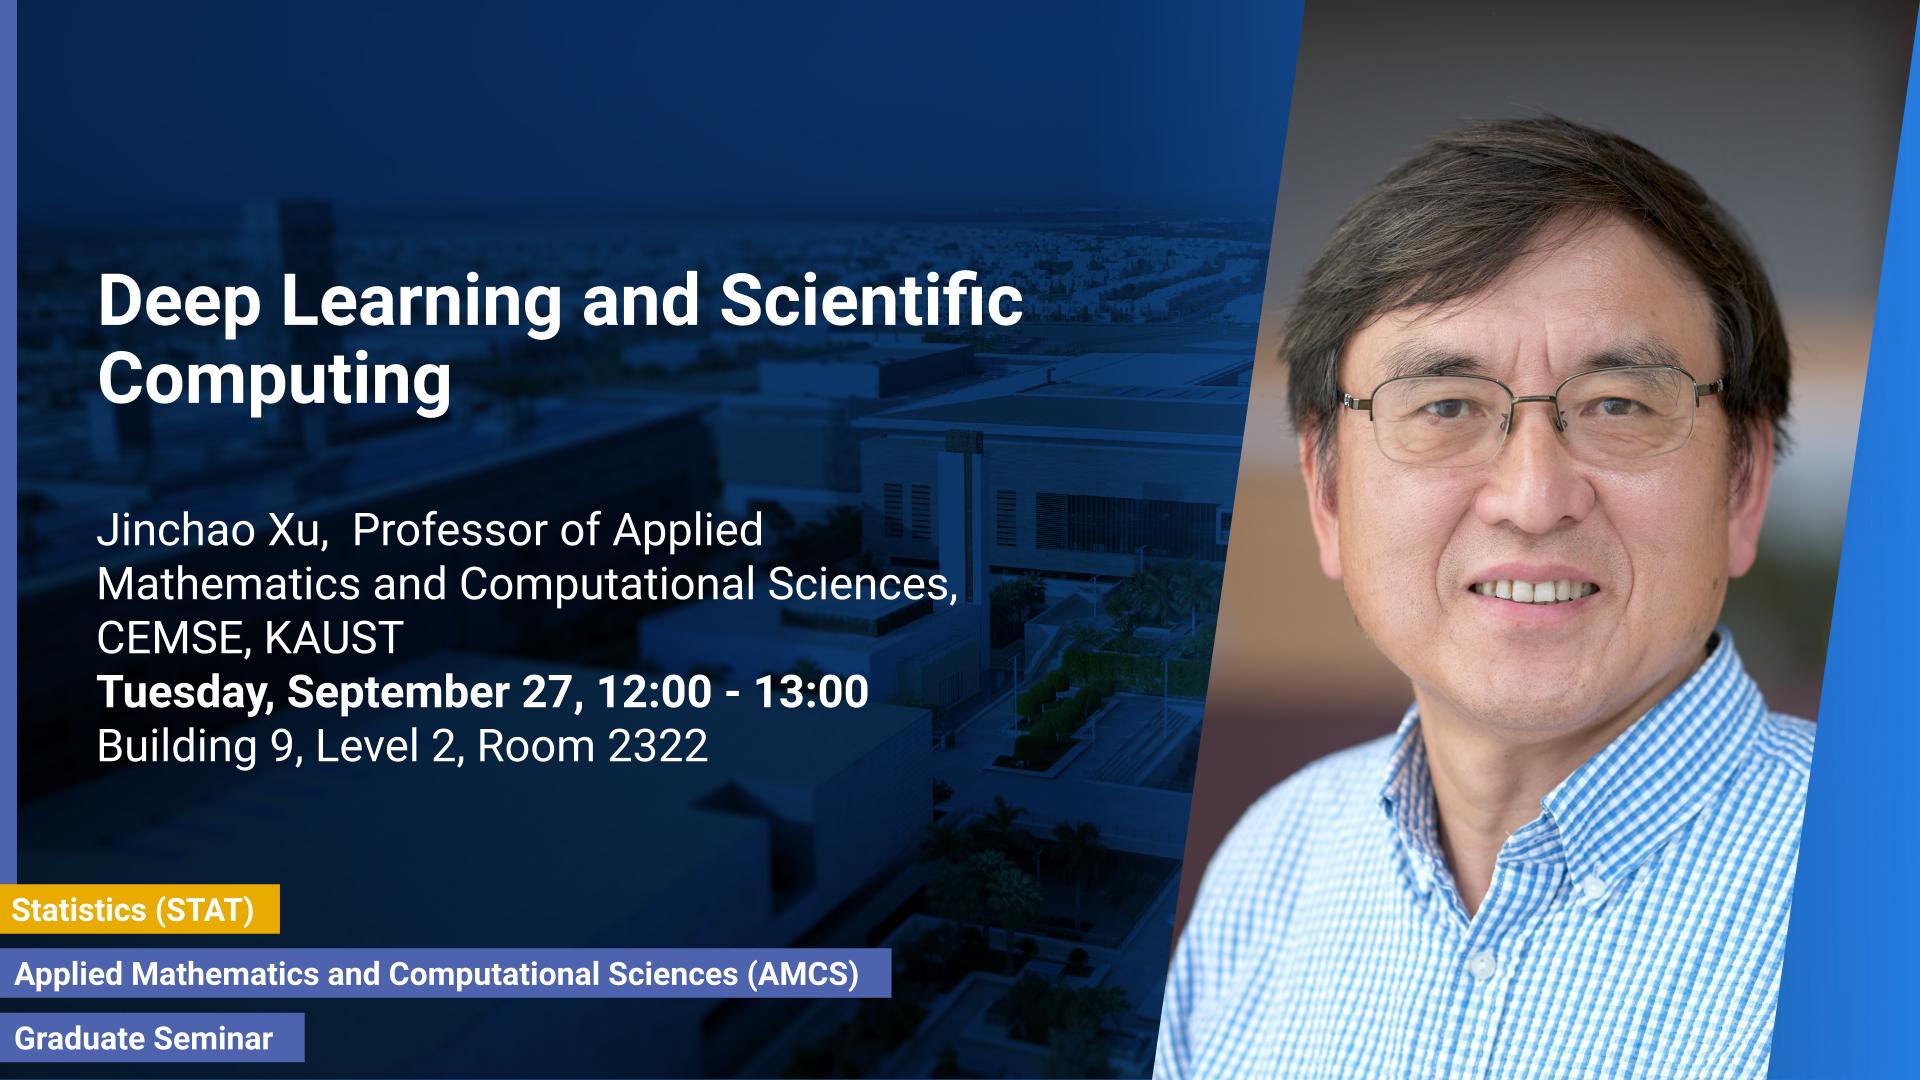 KAUST-CEMSE-AMCS-STAT-Deep-Learning-and-Scientific-Computing